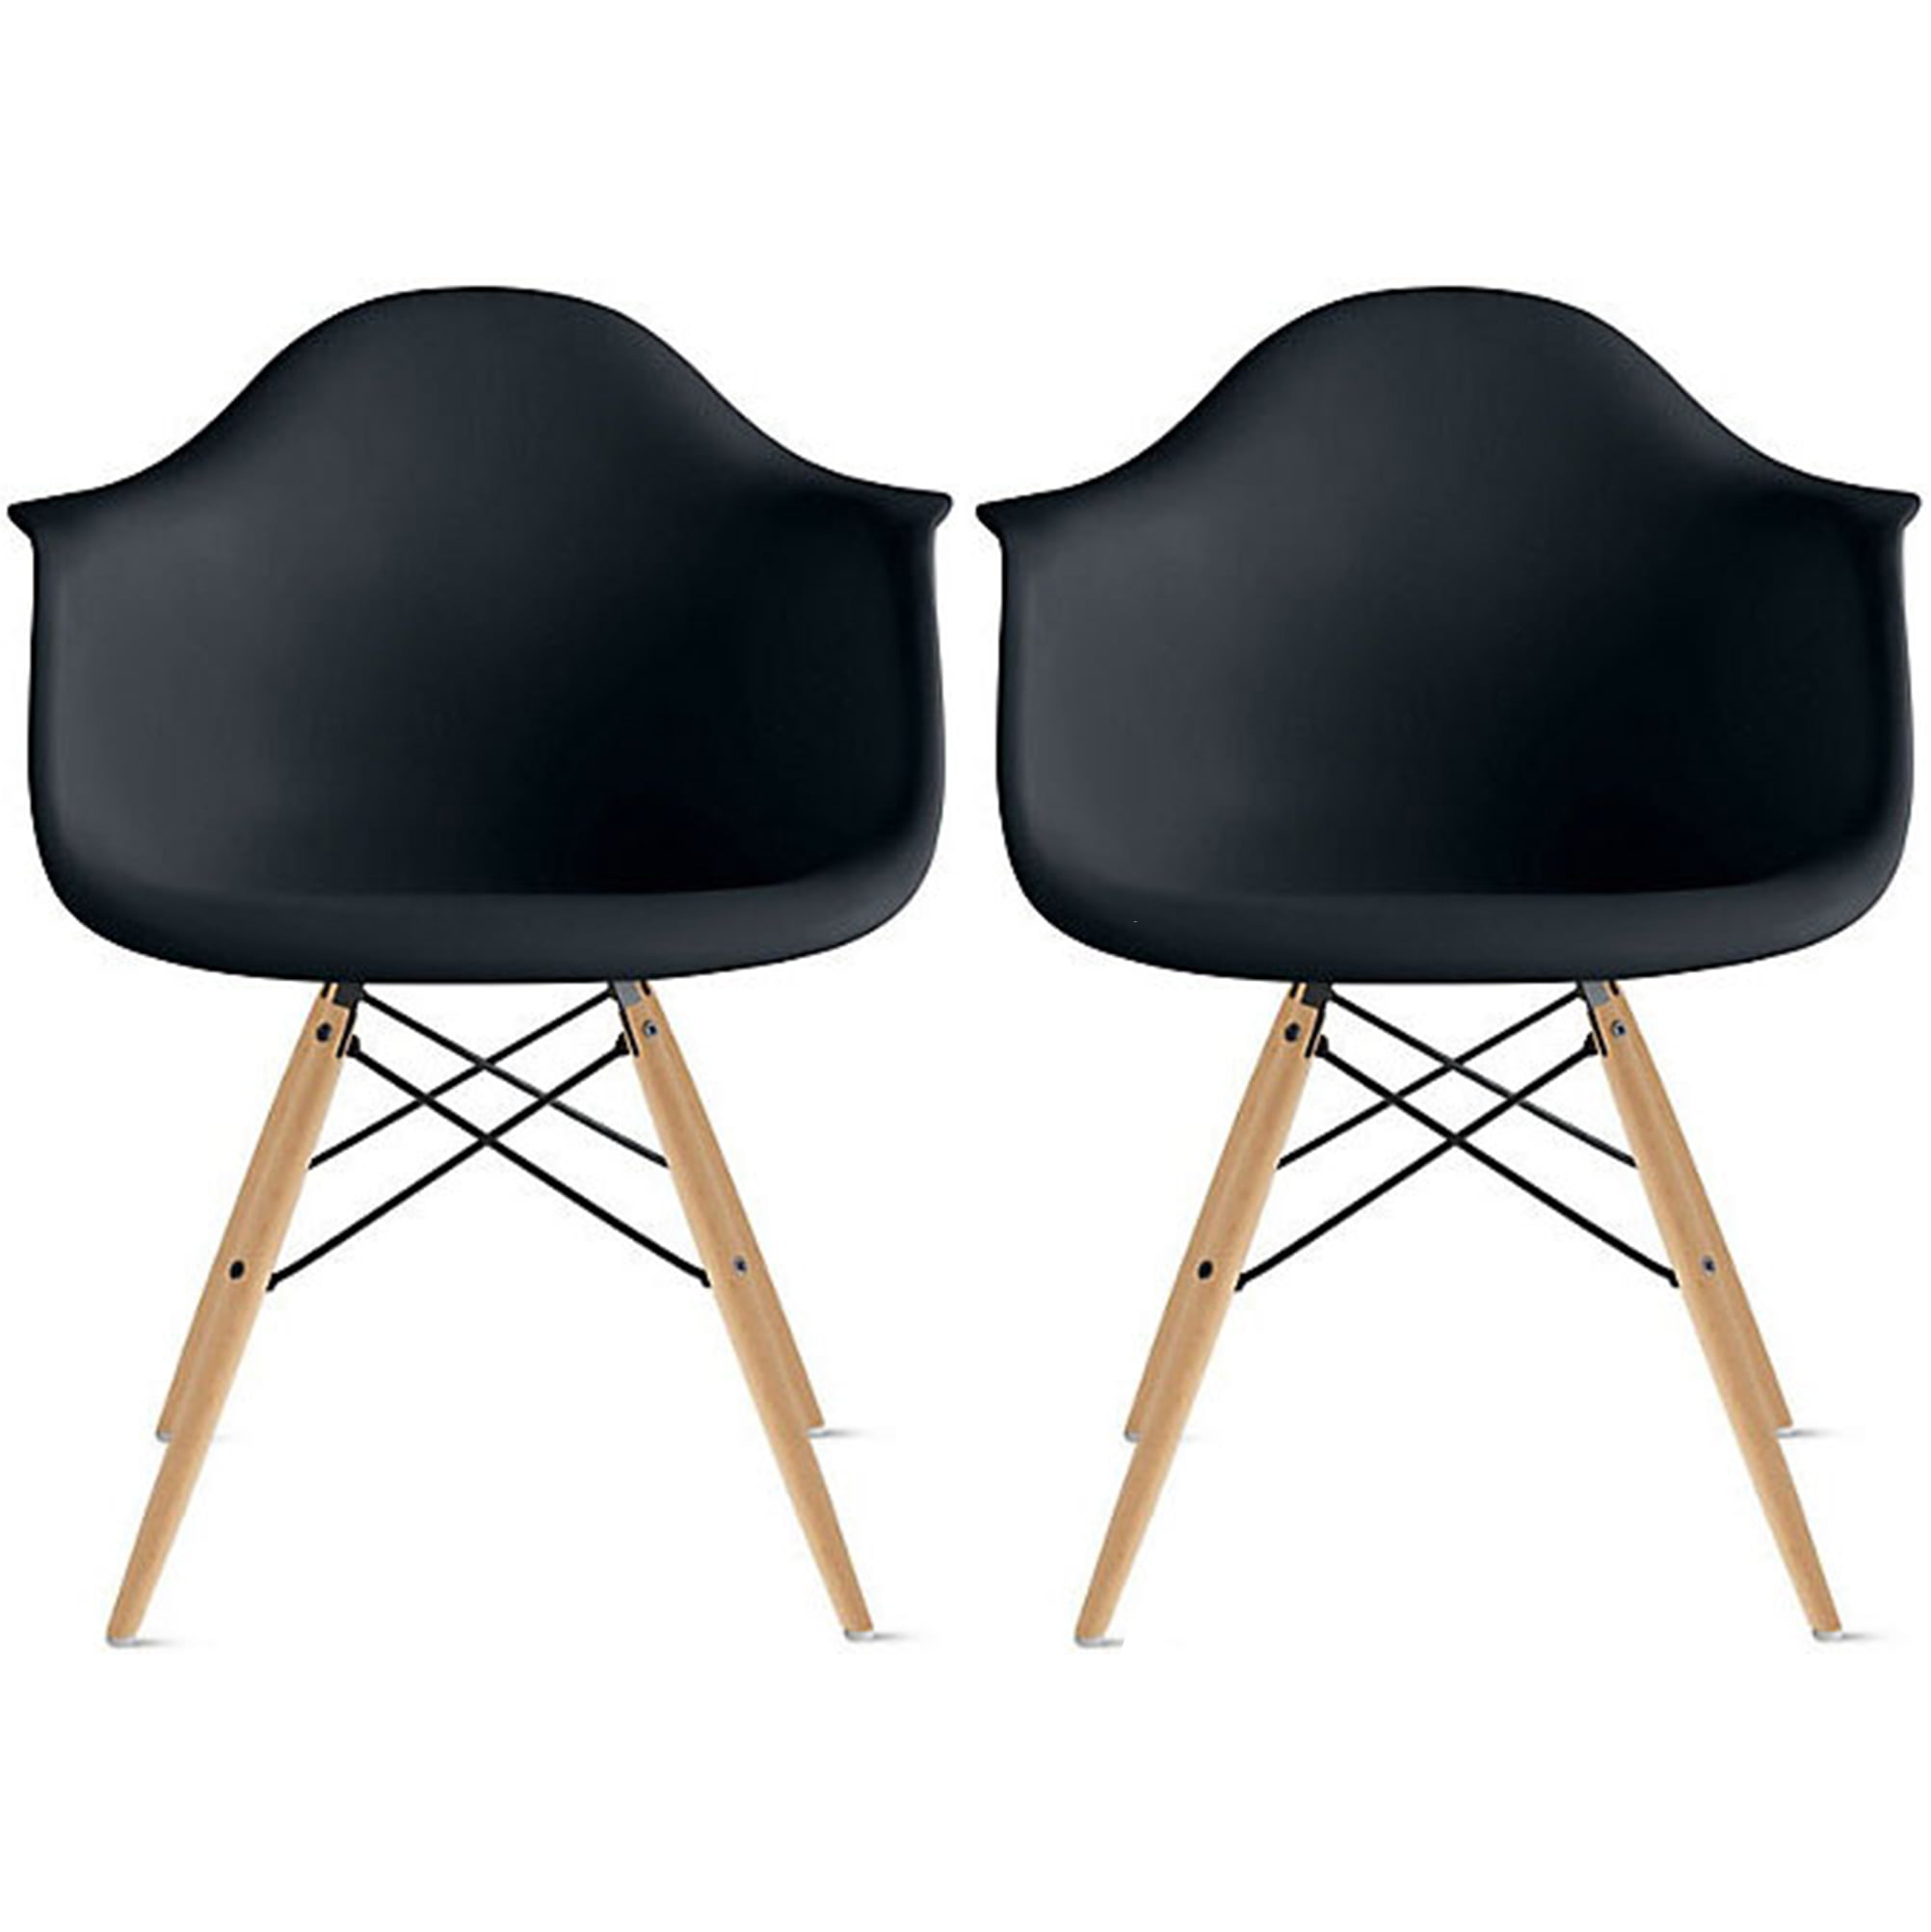 2xhome Set Of 2 Black Desk Chairs Mid Century Modern Plastic Dining Chair Molded Arms Armchairs Natural Wood Legs No Wheels Accent Vintage, Black Desk Chair No Wheels